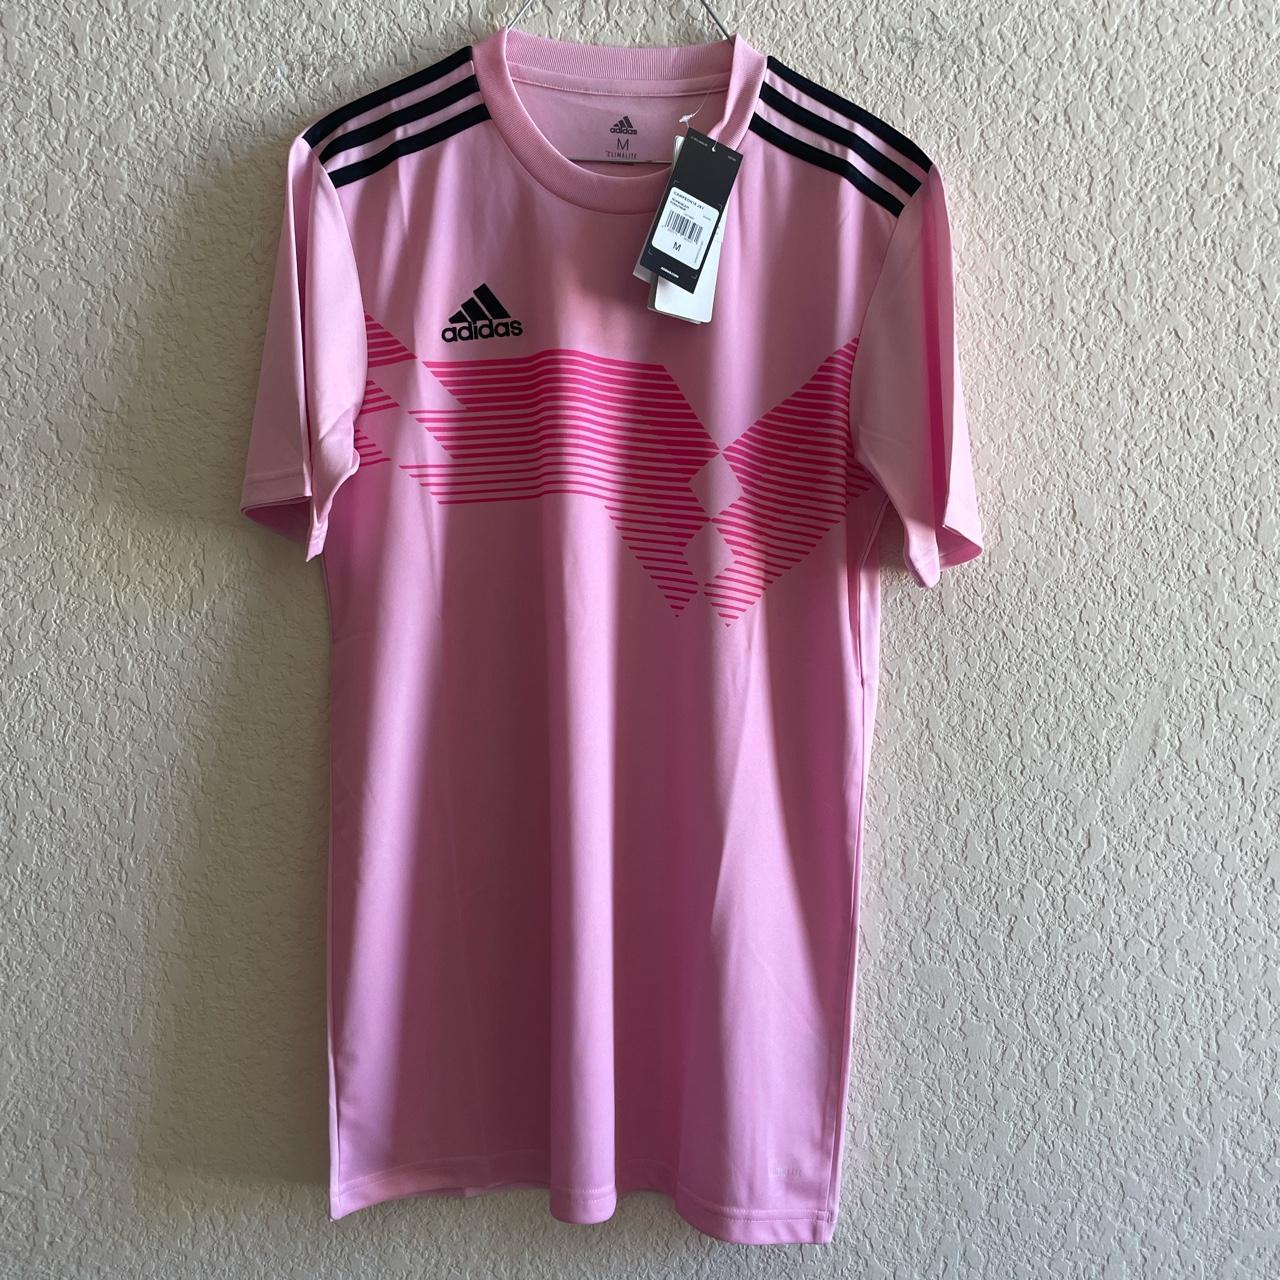 Adidas Campeon 19 Soccer Jersey - Pink and... - Depop